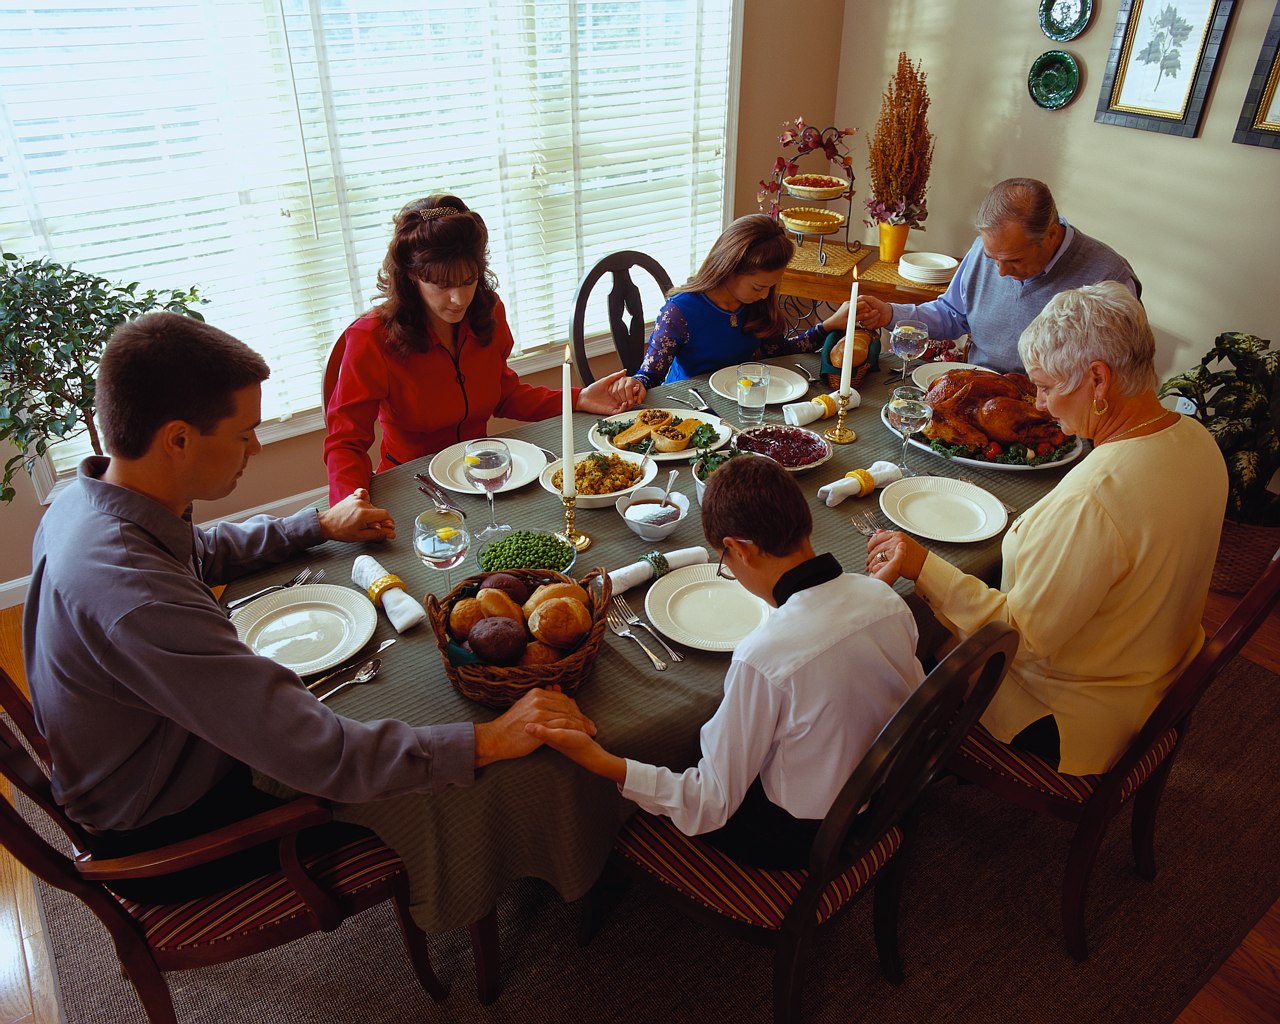 What Financial Advice Are You Most Thankful For?